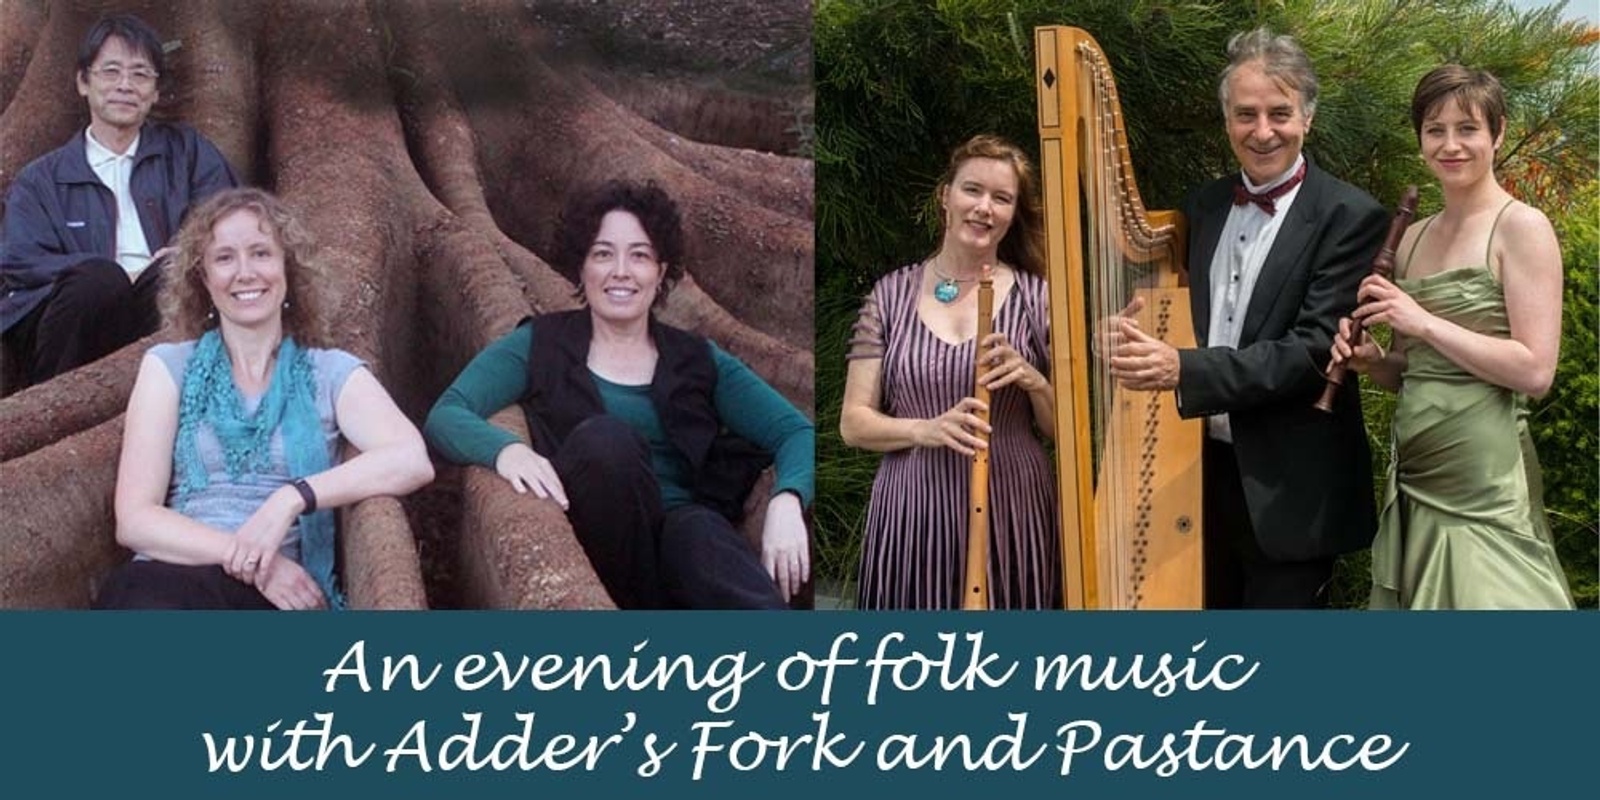 Banner image for An evening of folk music with Adder’s Fork and Pastance